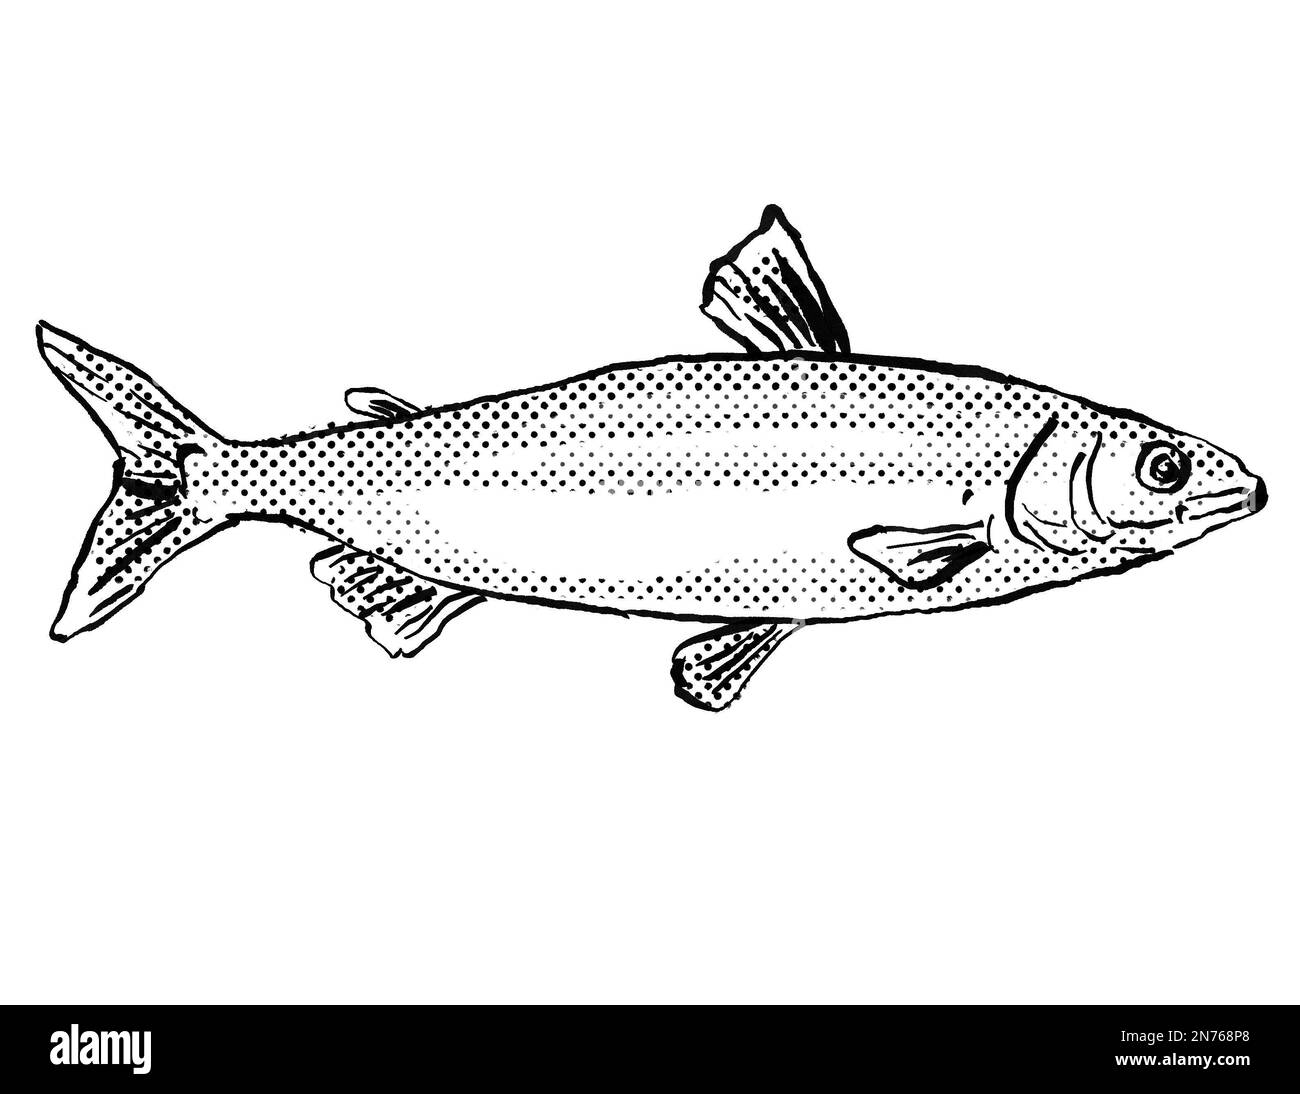 Cartoon style line drawing of a European whitefish or Coregonus lavaretus  a fish endemic to Germany and Europe in Atlantic Ocean with halftone dots s Stock Photo